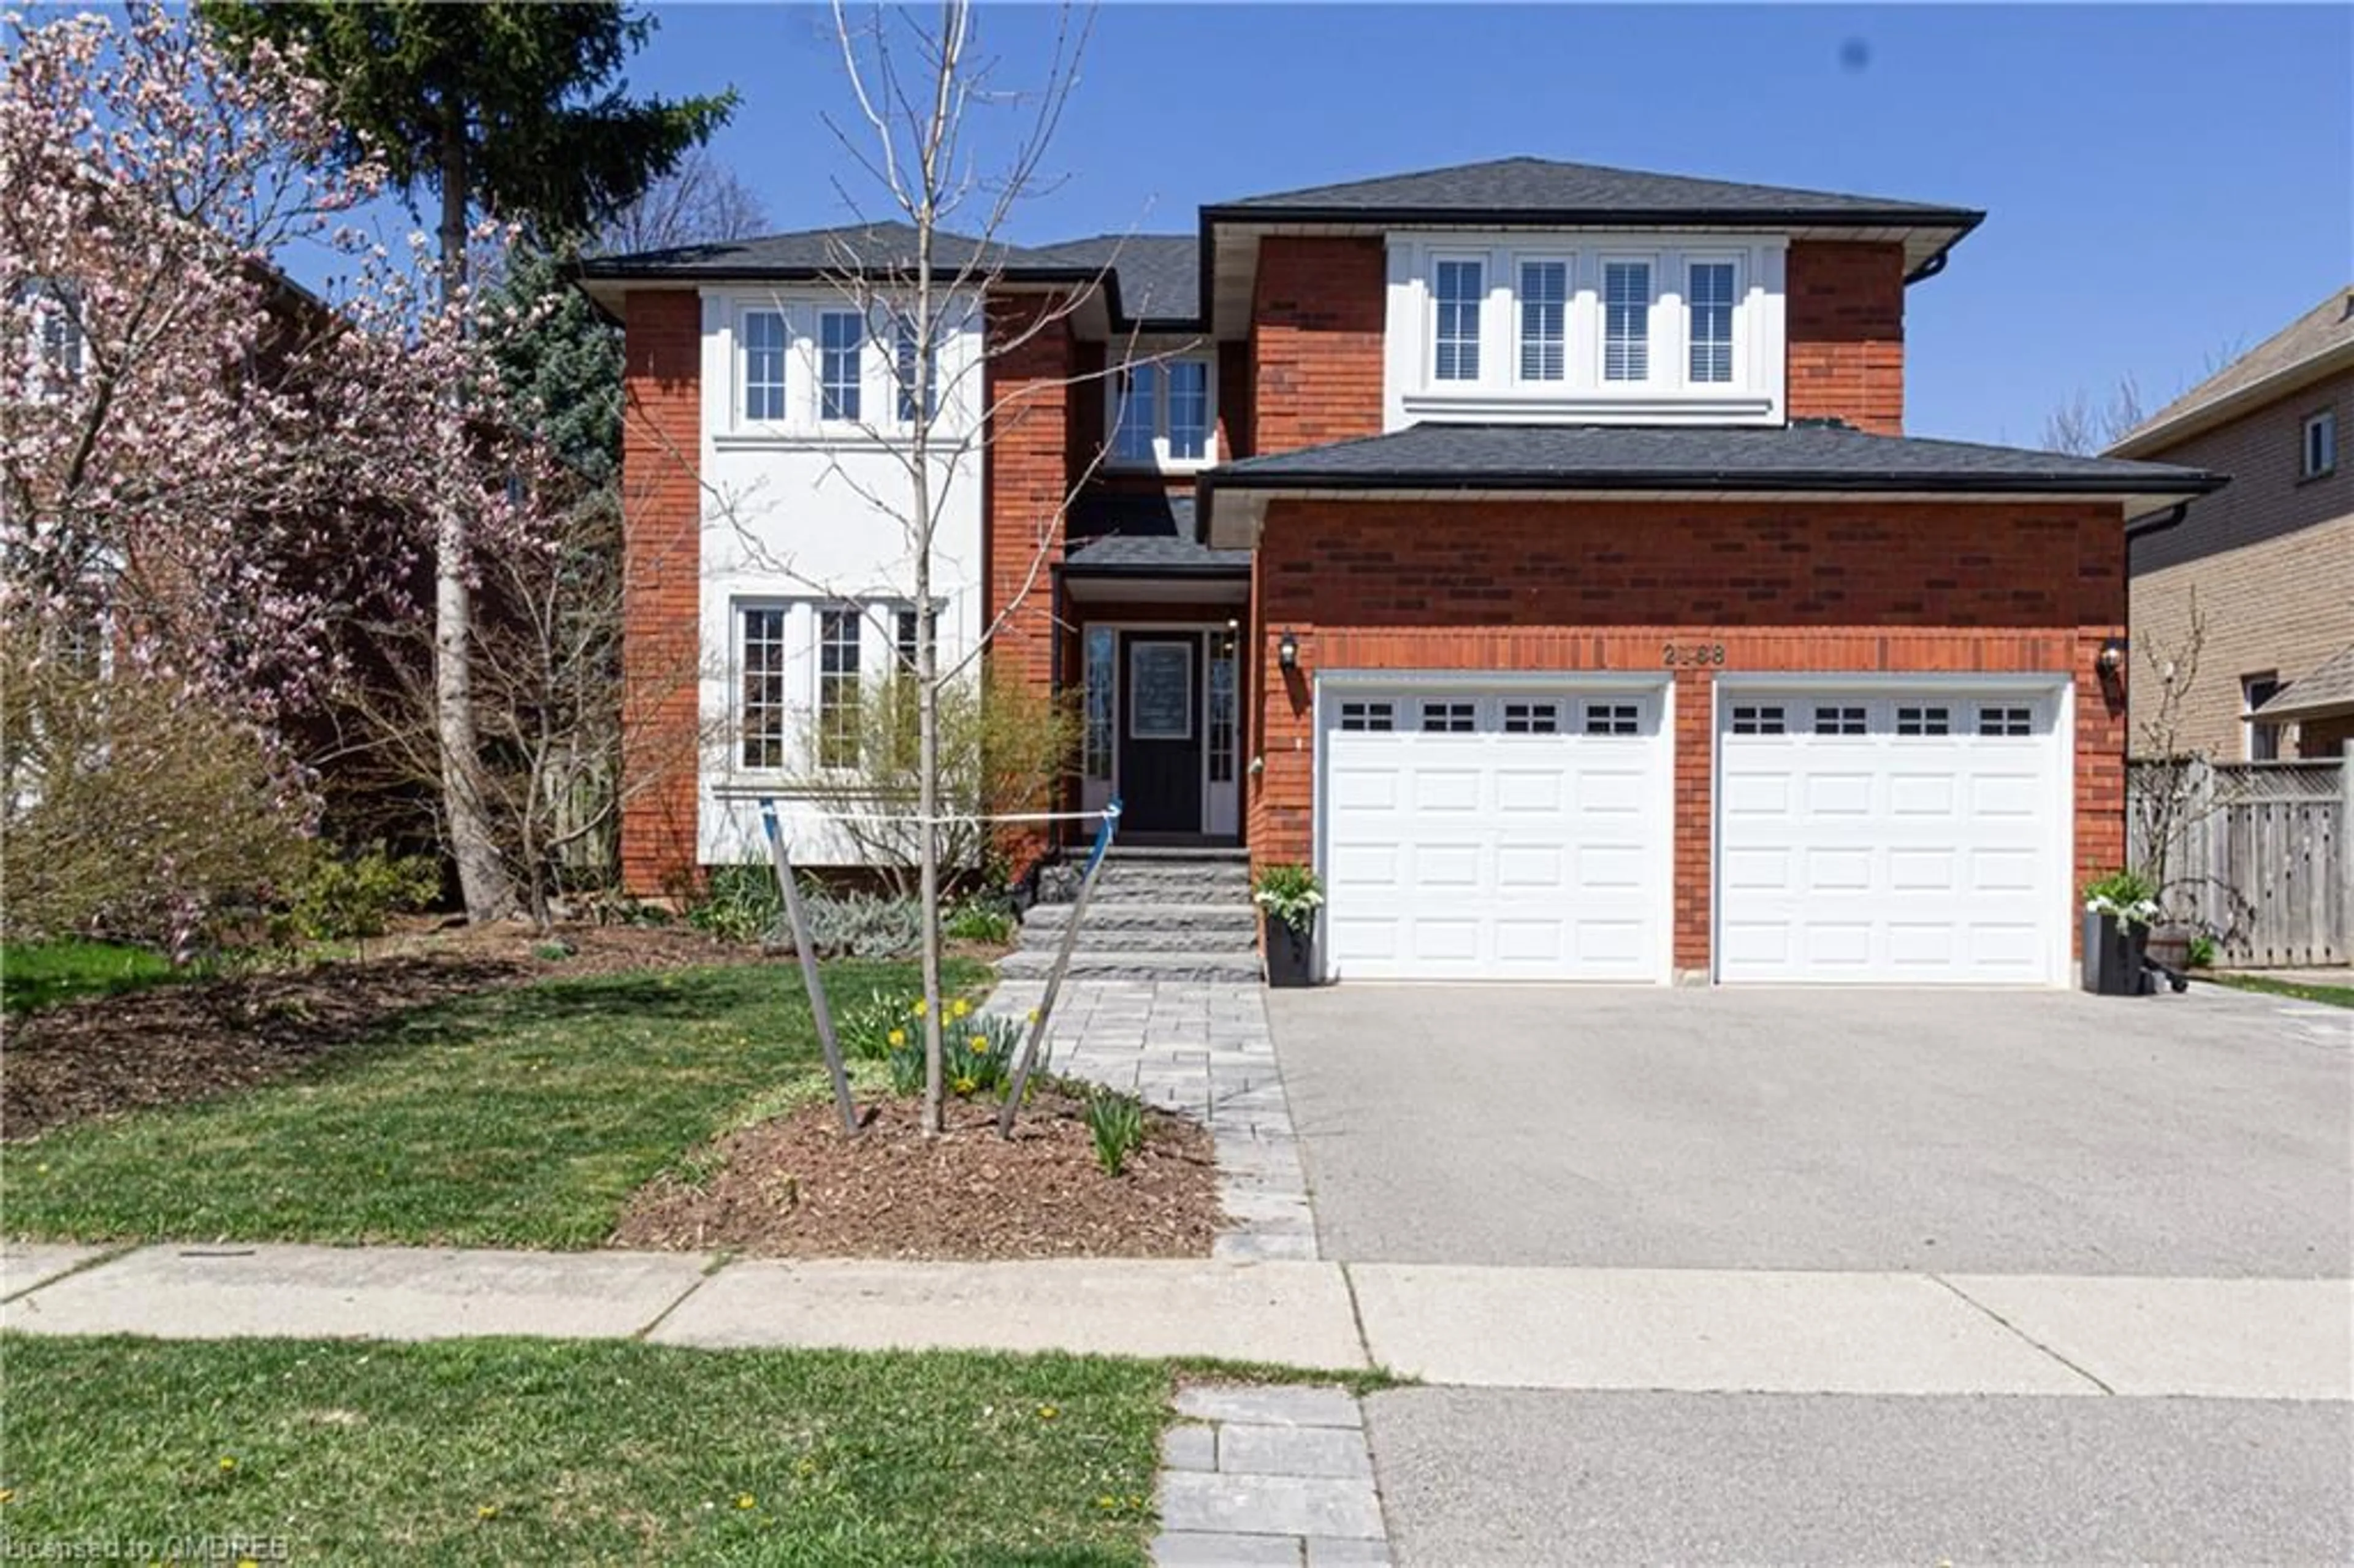 Home with brick exterior material for 2168 Winding Woods Dr, Oakville Ontario L6H 5T8